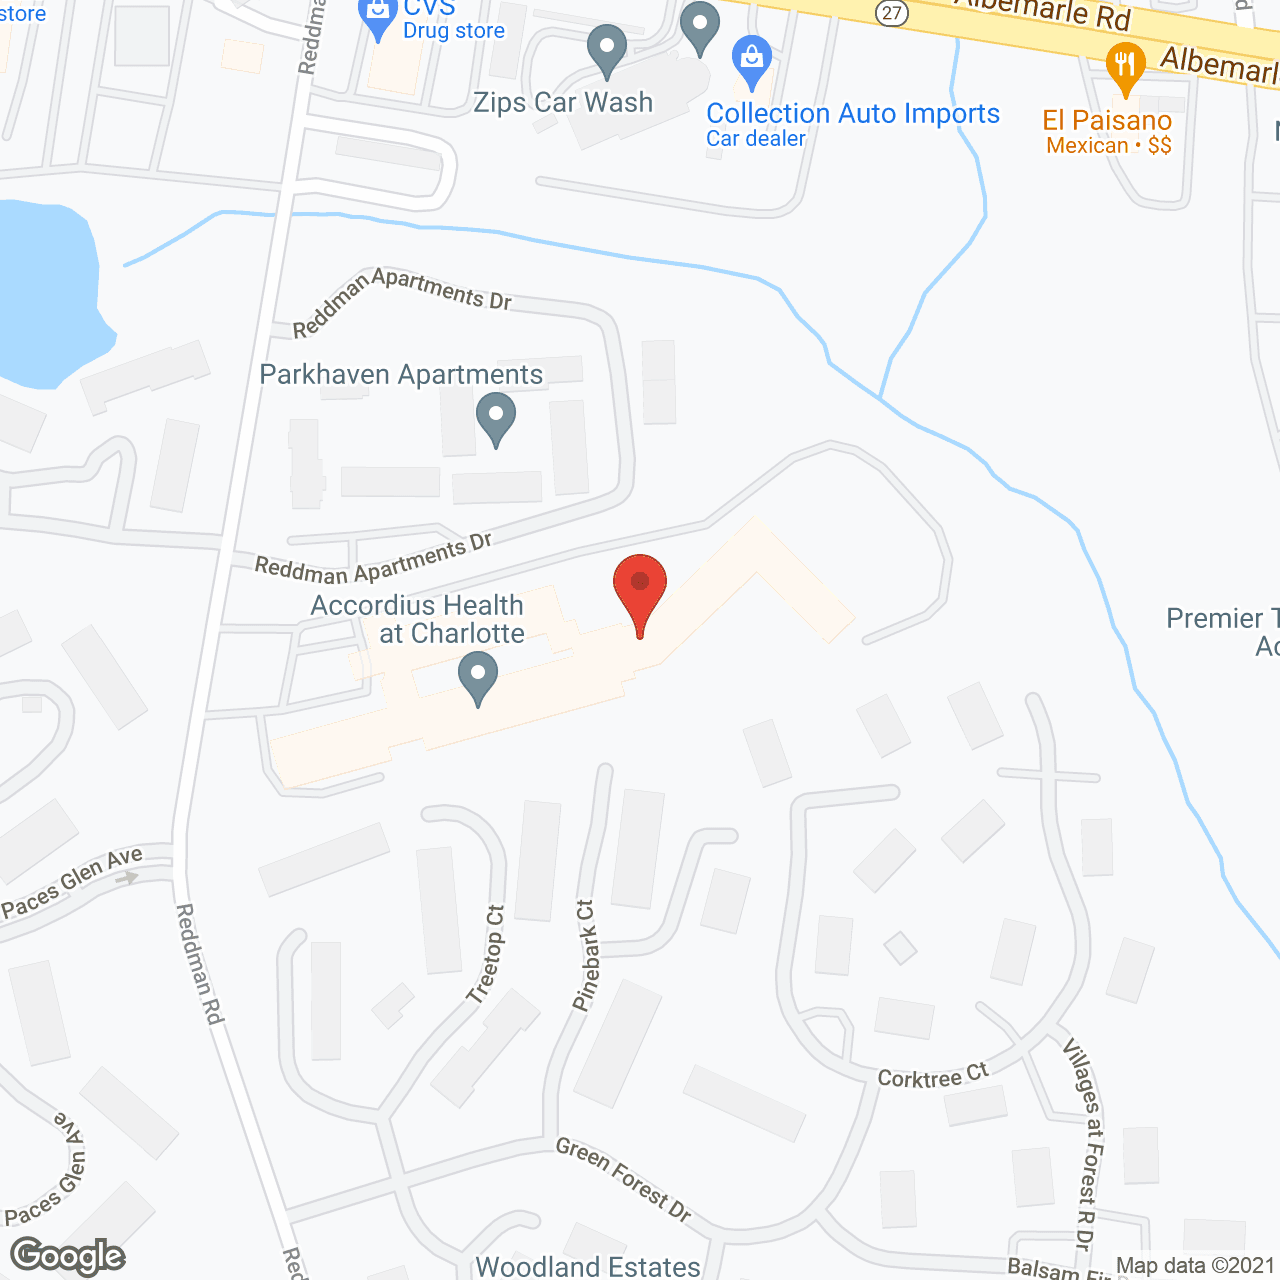 Brian Center Retirement Apartments in google map